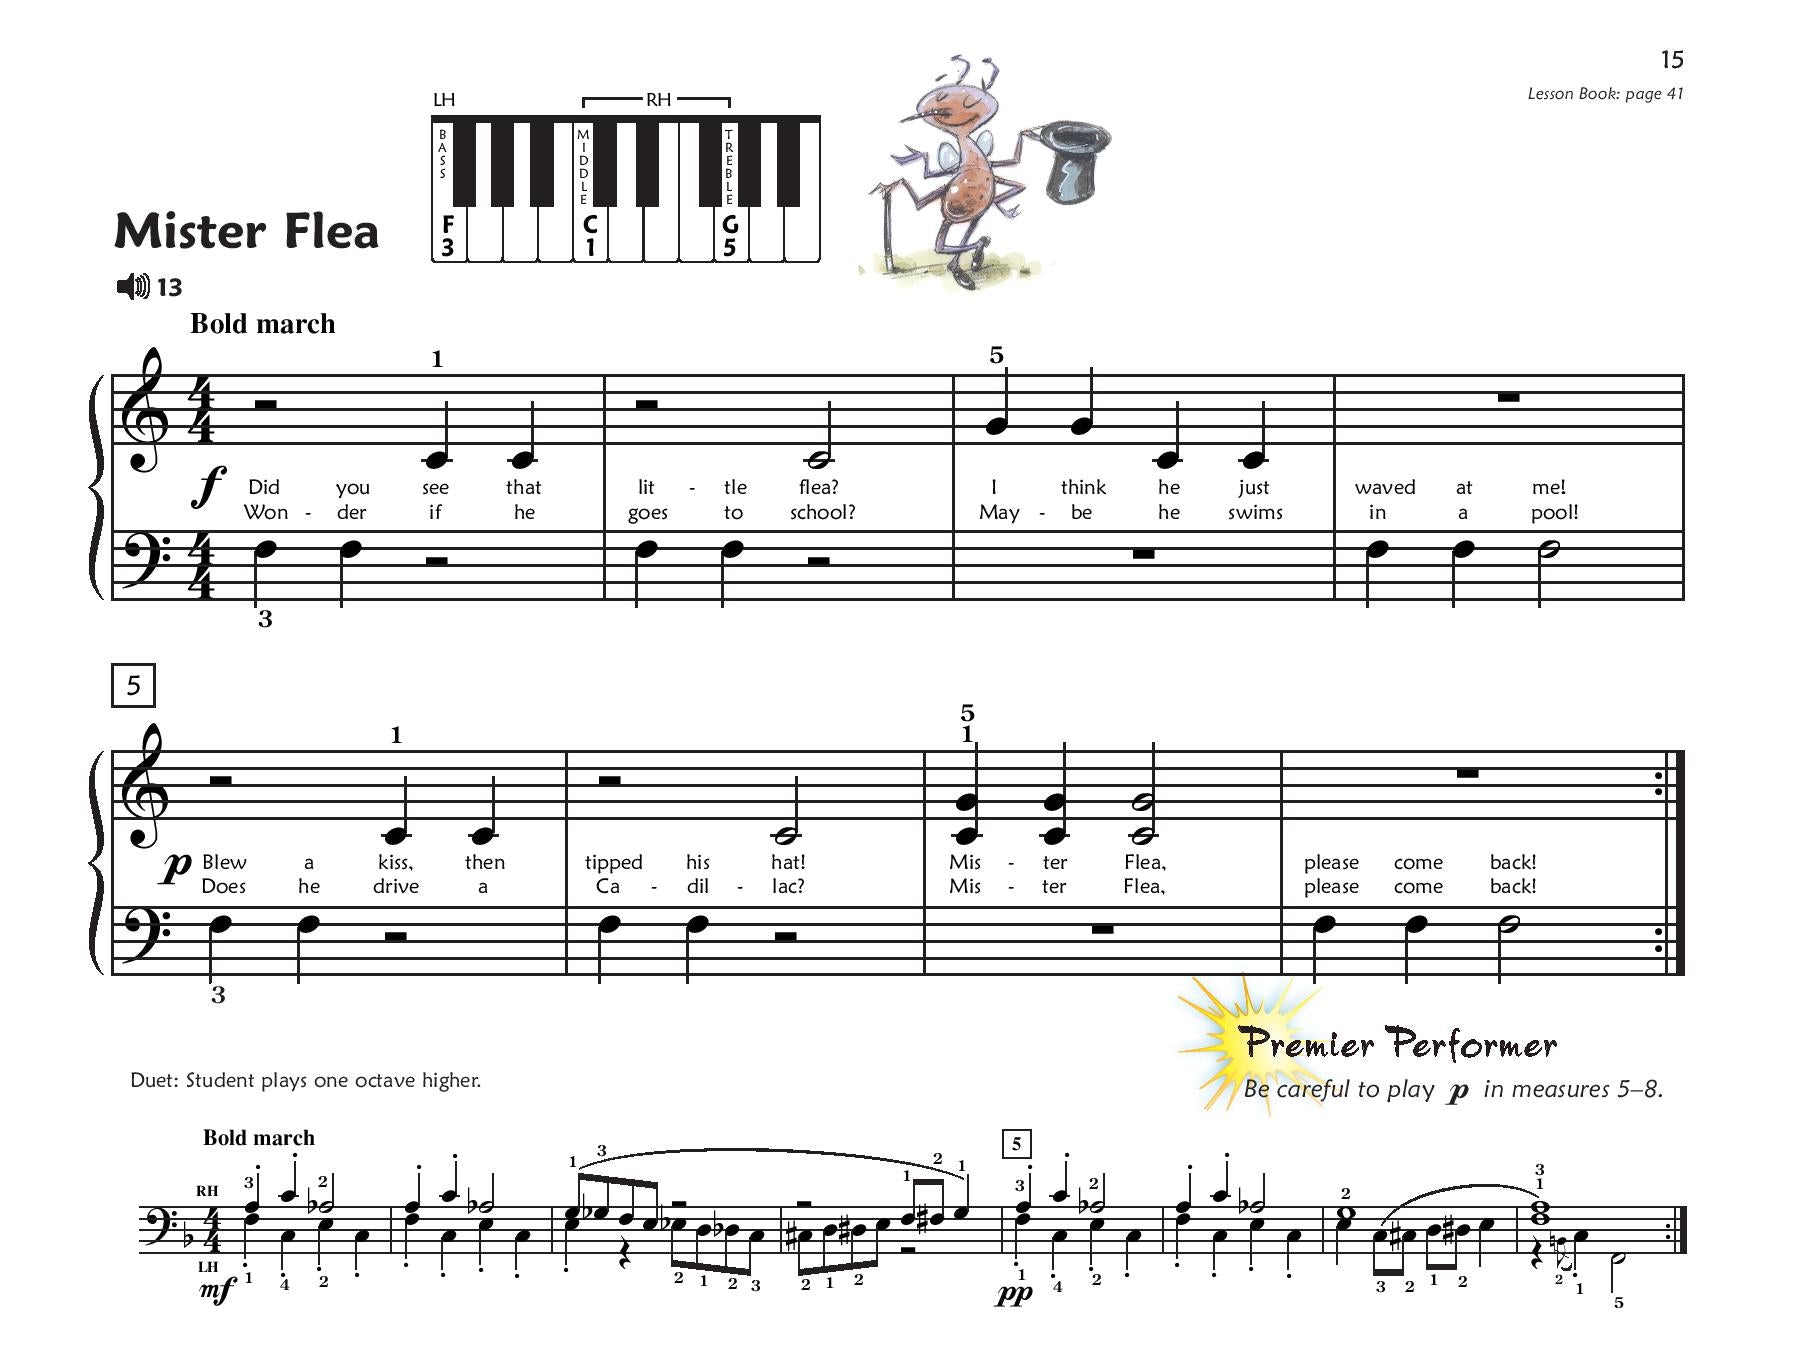 Alfred's Premier Piano Course, Performance 1A